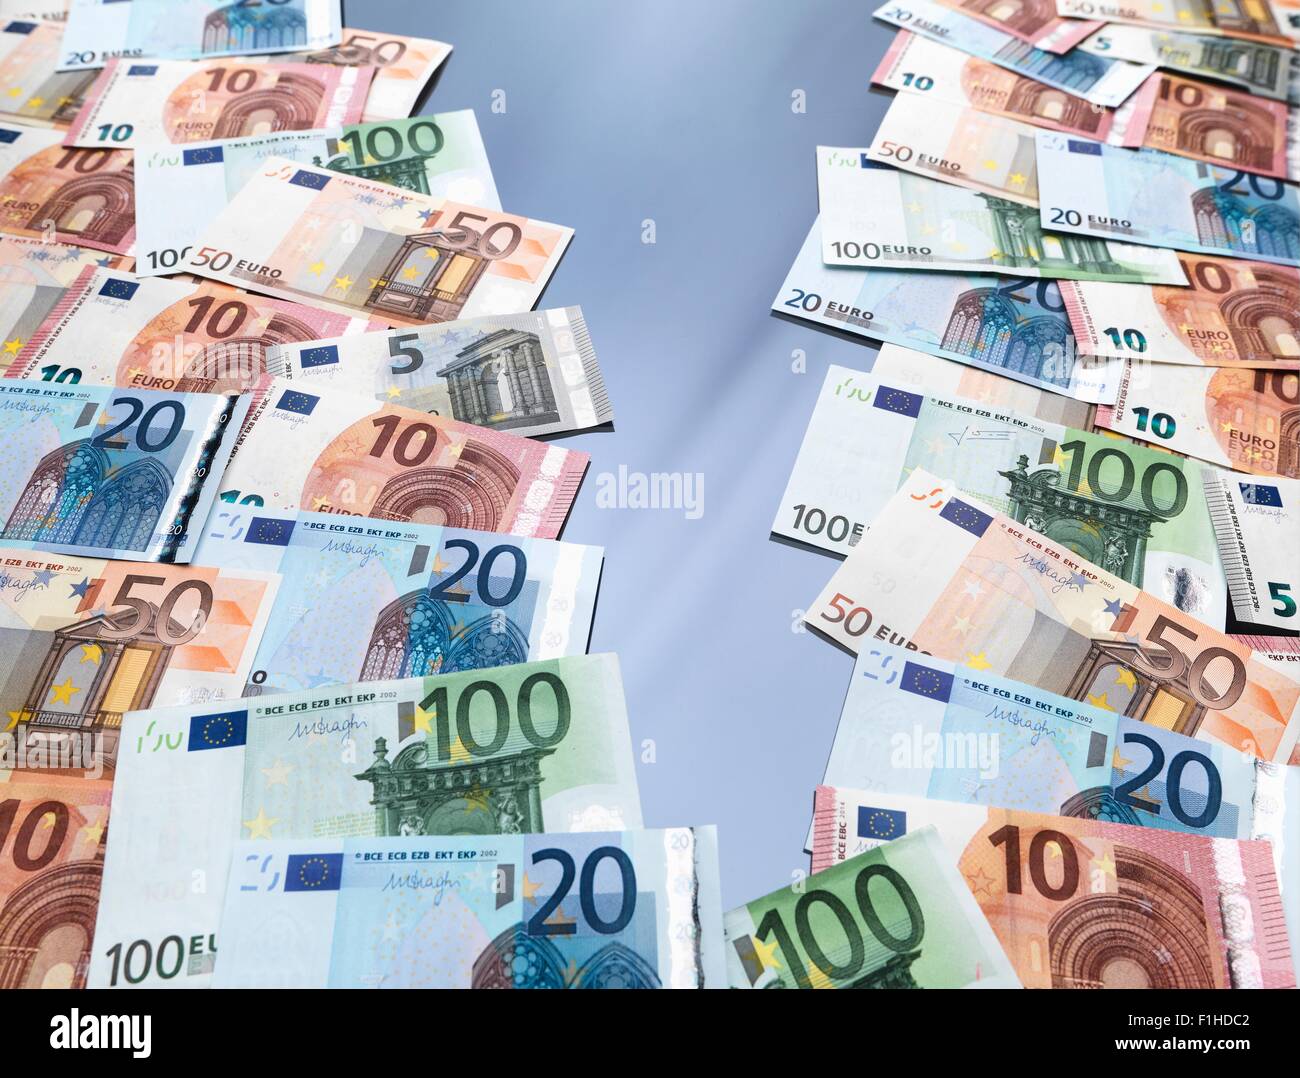 Euro currency notes split into two piles Stock Photo